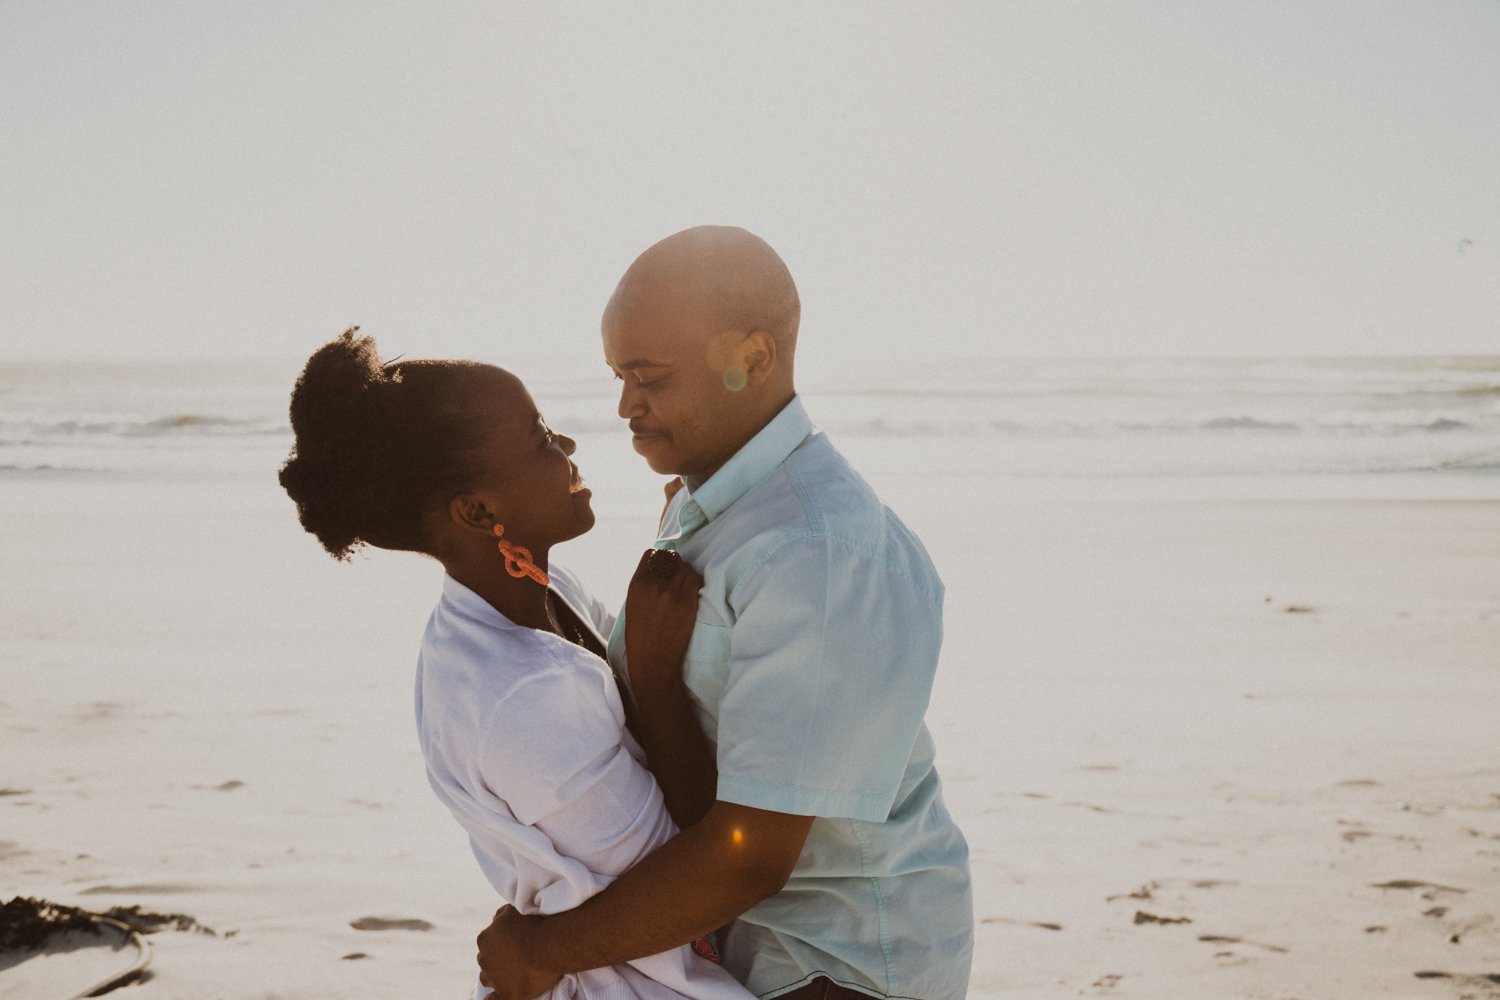 Susnet Beach Engagement Photoshoot in Cape Town - Bianca Asher Photography-3.jpg